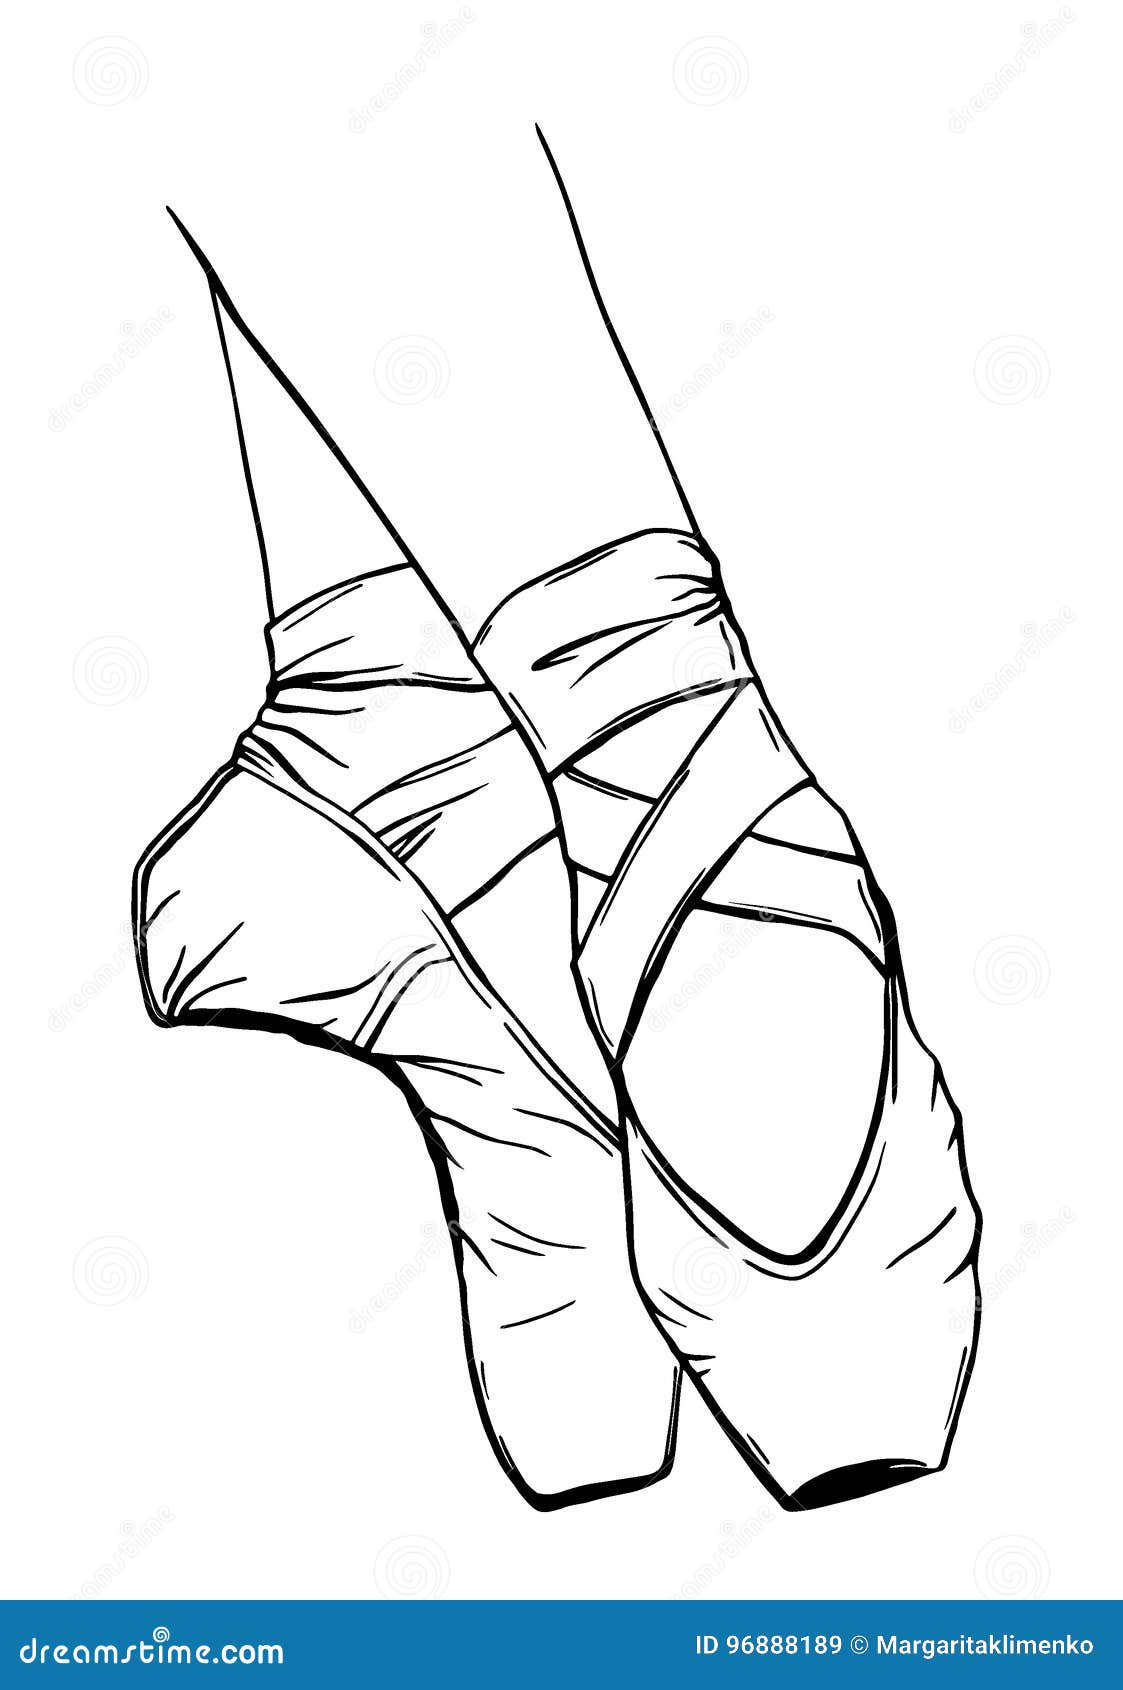 Ballet Shoes Coloring Page  Easy Drawing Guides